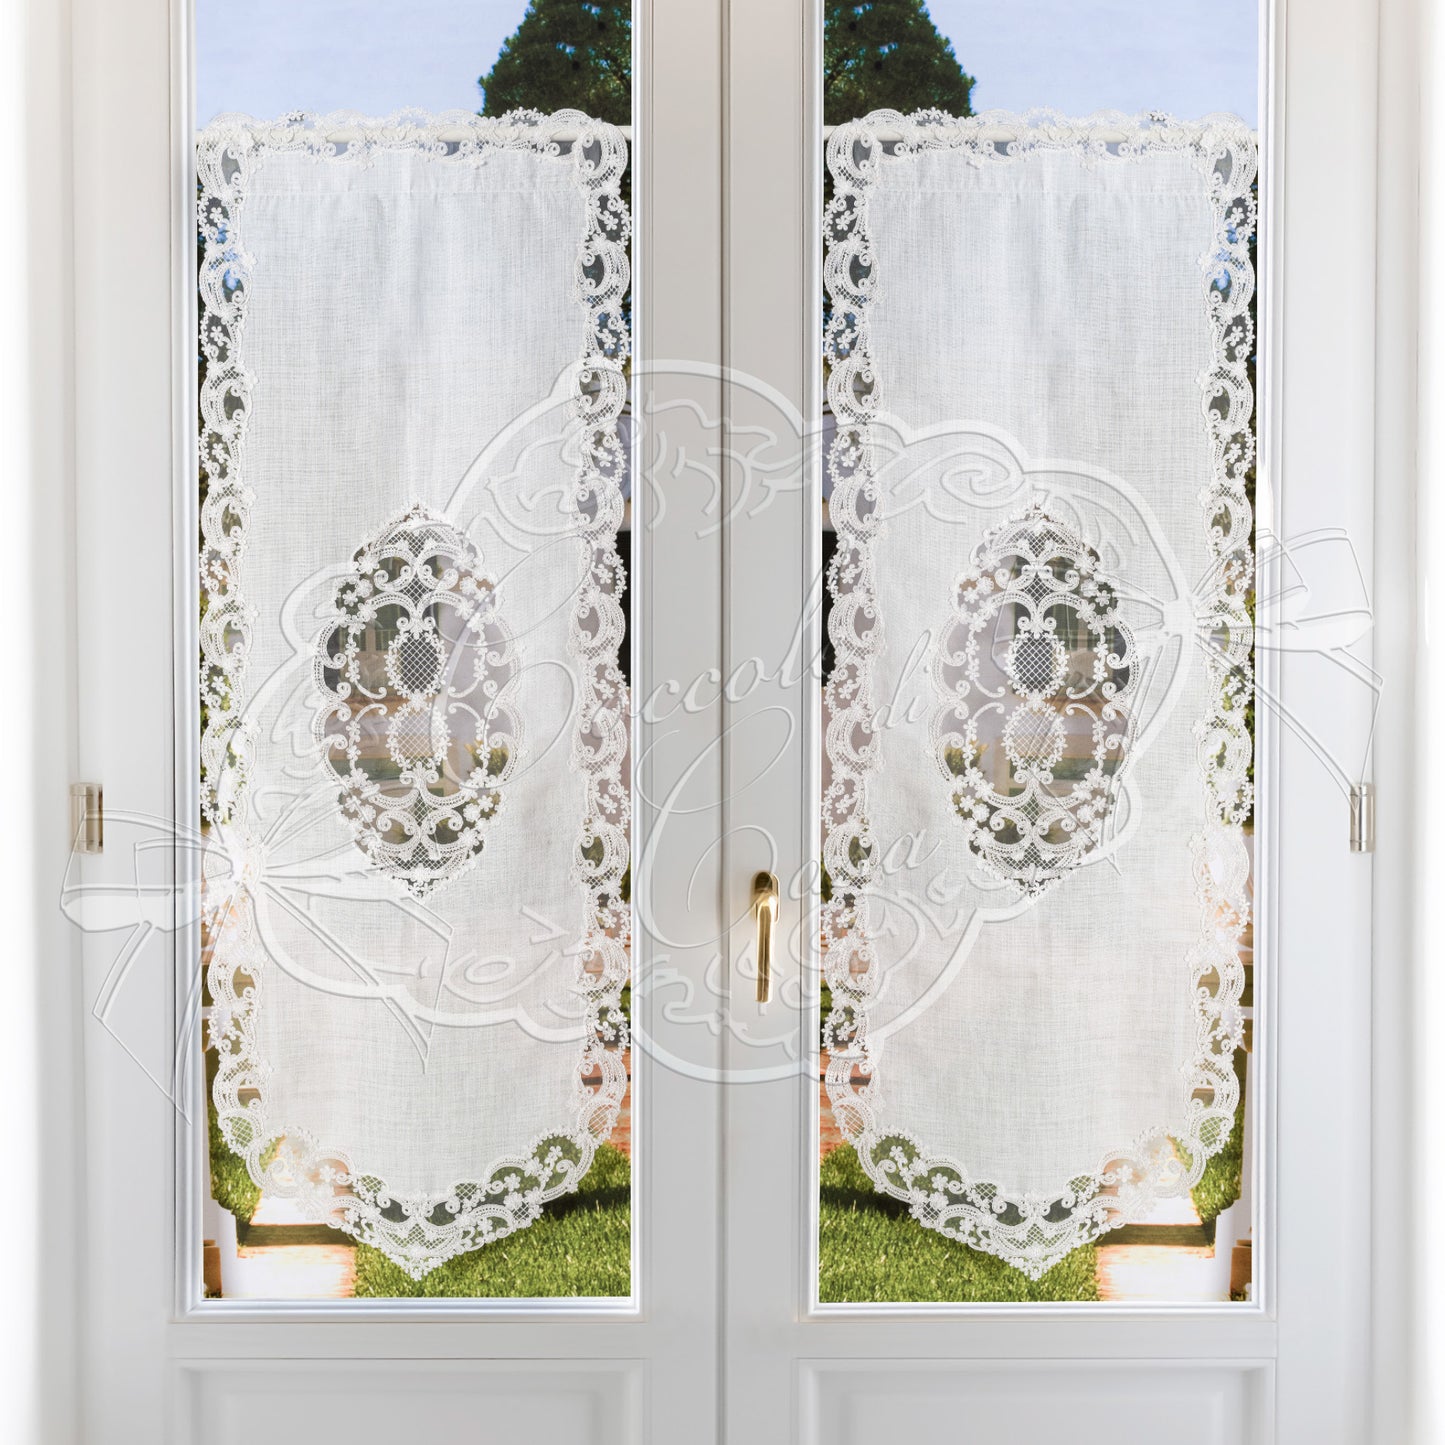 L.JASMINE LINEN WINDOW CURTAIN WITH LACE160